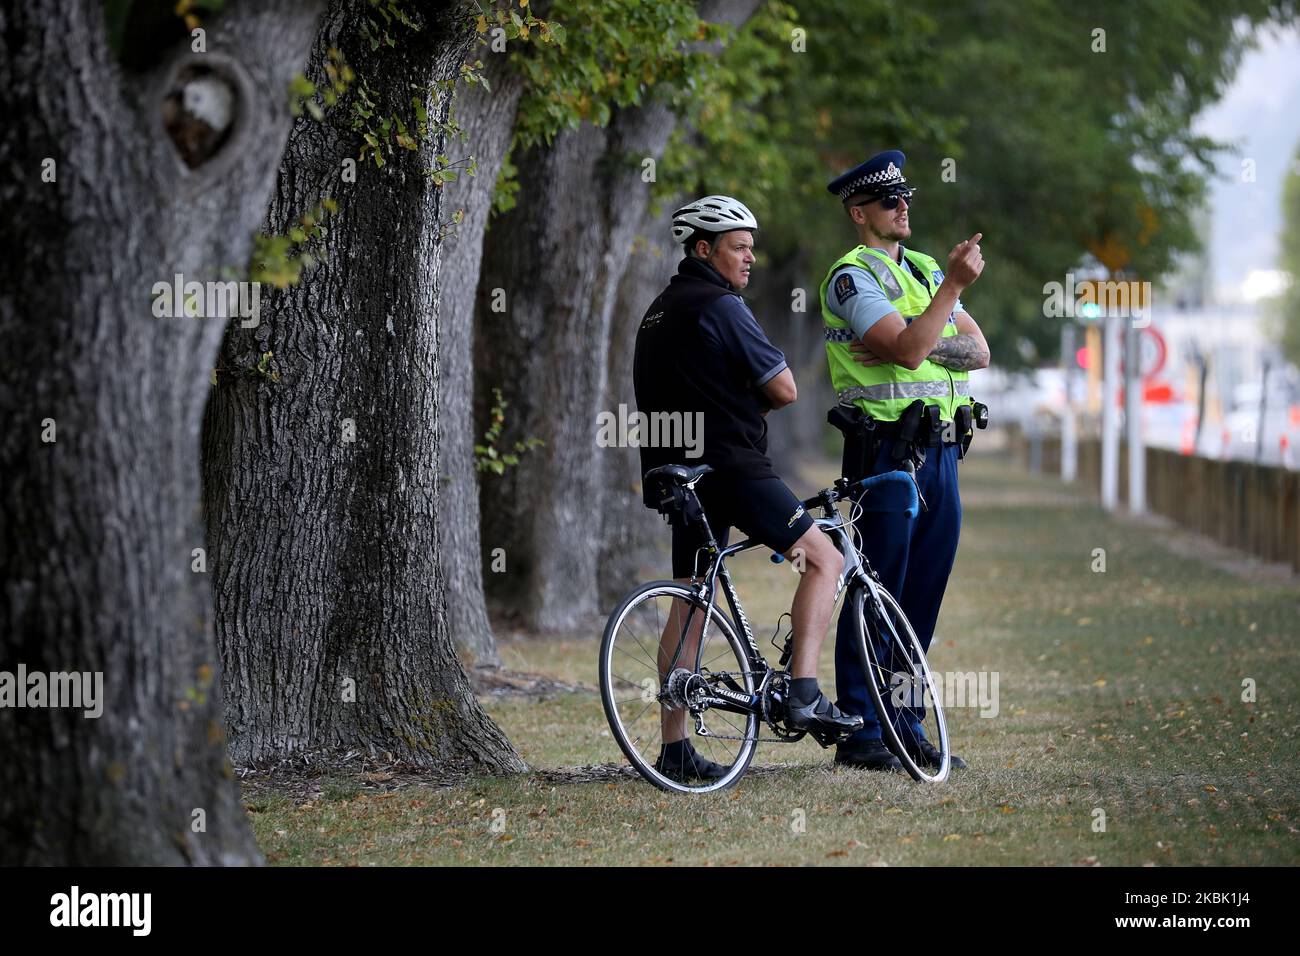 A cyclist talks with a police officer outsideÂ the Al Noor mosque in Christchurch, New Zealand on March 15, 2020. On March 15 last year, 51 people died and 49 were injured in the shootings at Christchurch's Al Noor and Linwood MosquesÂ when a gunman opened fire on worshippers.Â It was labeled as New Zealand's 'darkest day'.Â Events around the country including the Christchurch National Remembrance Service which marking the first anniversary of the attacks has been canceled amid safety fears over Covid-19.Â (Photo by Sanka Vidanagama/NurPhoto) Stock Photo